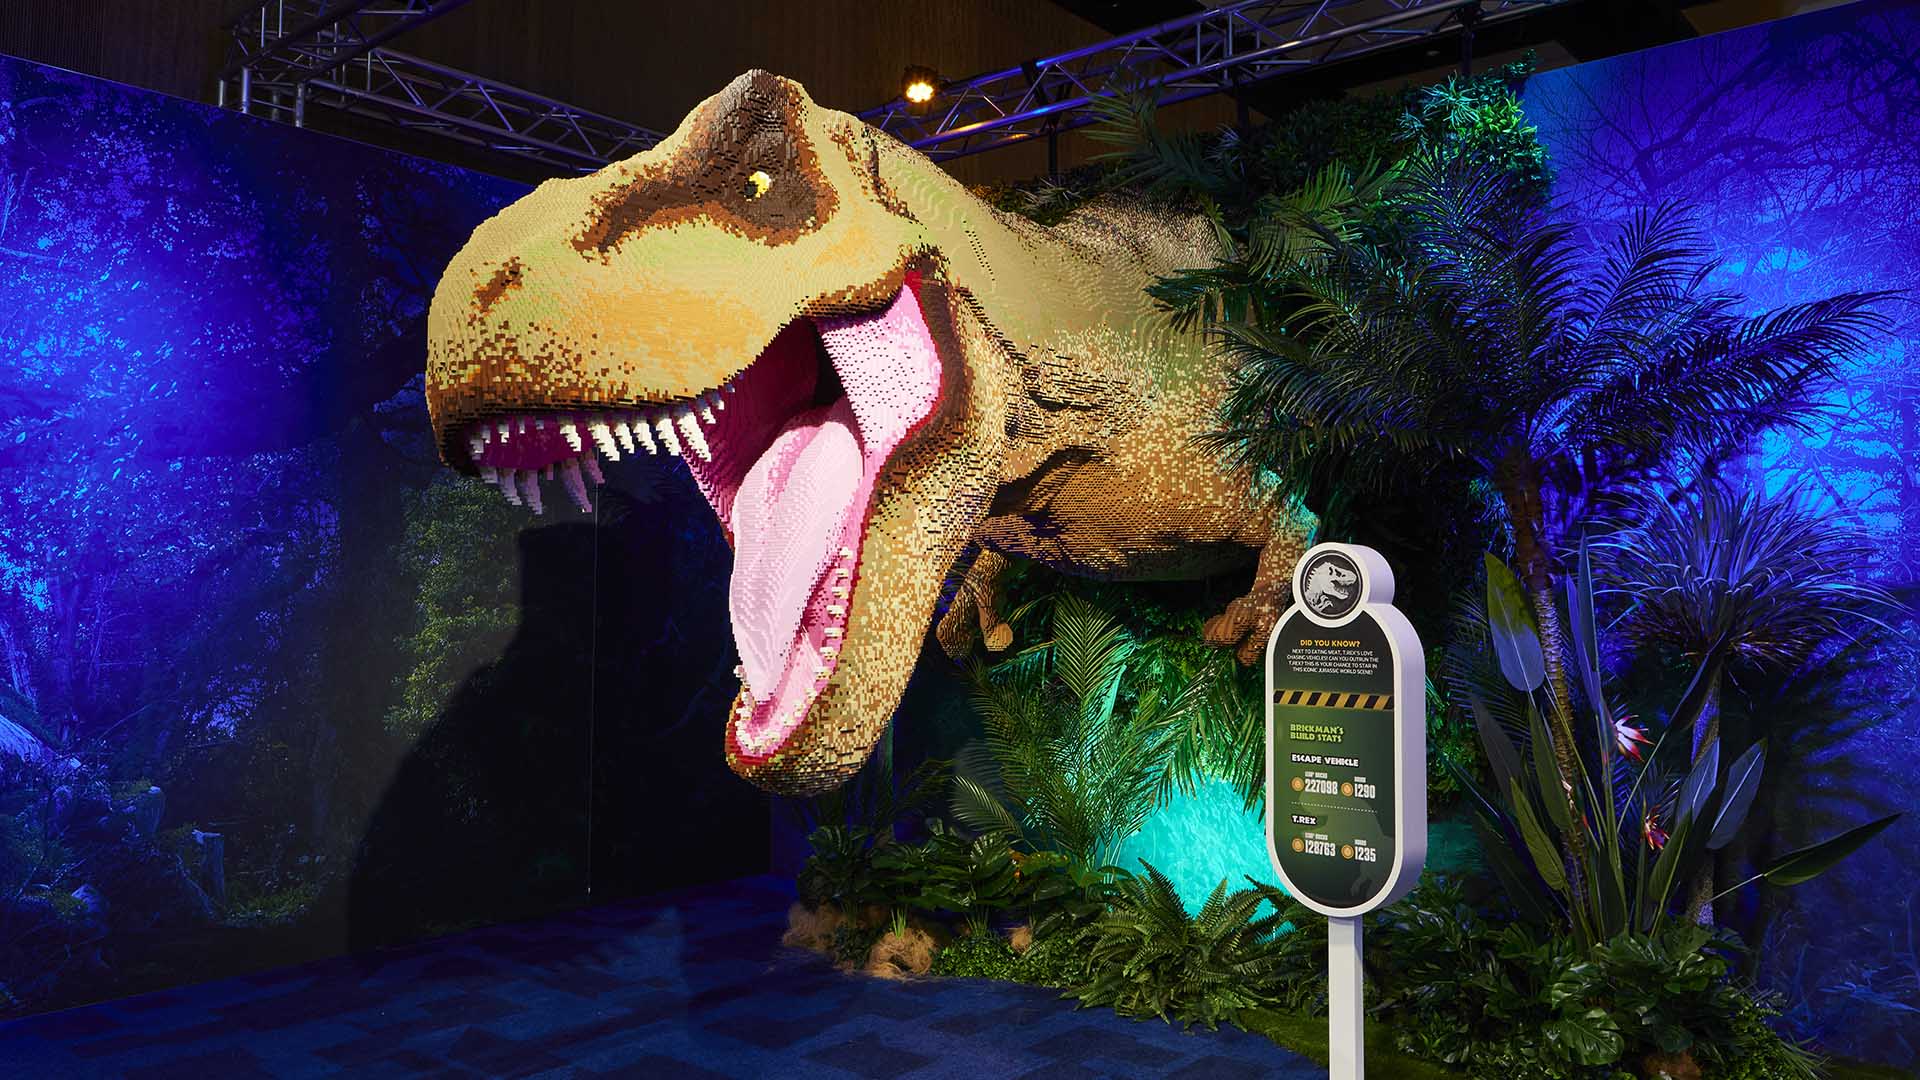 A Lego Exhibition That Recreates 'Jurassic World' with Six Million-Plus Bricks Is Coming to Sydney